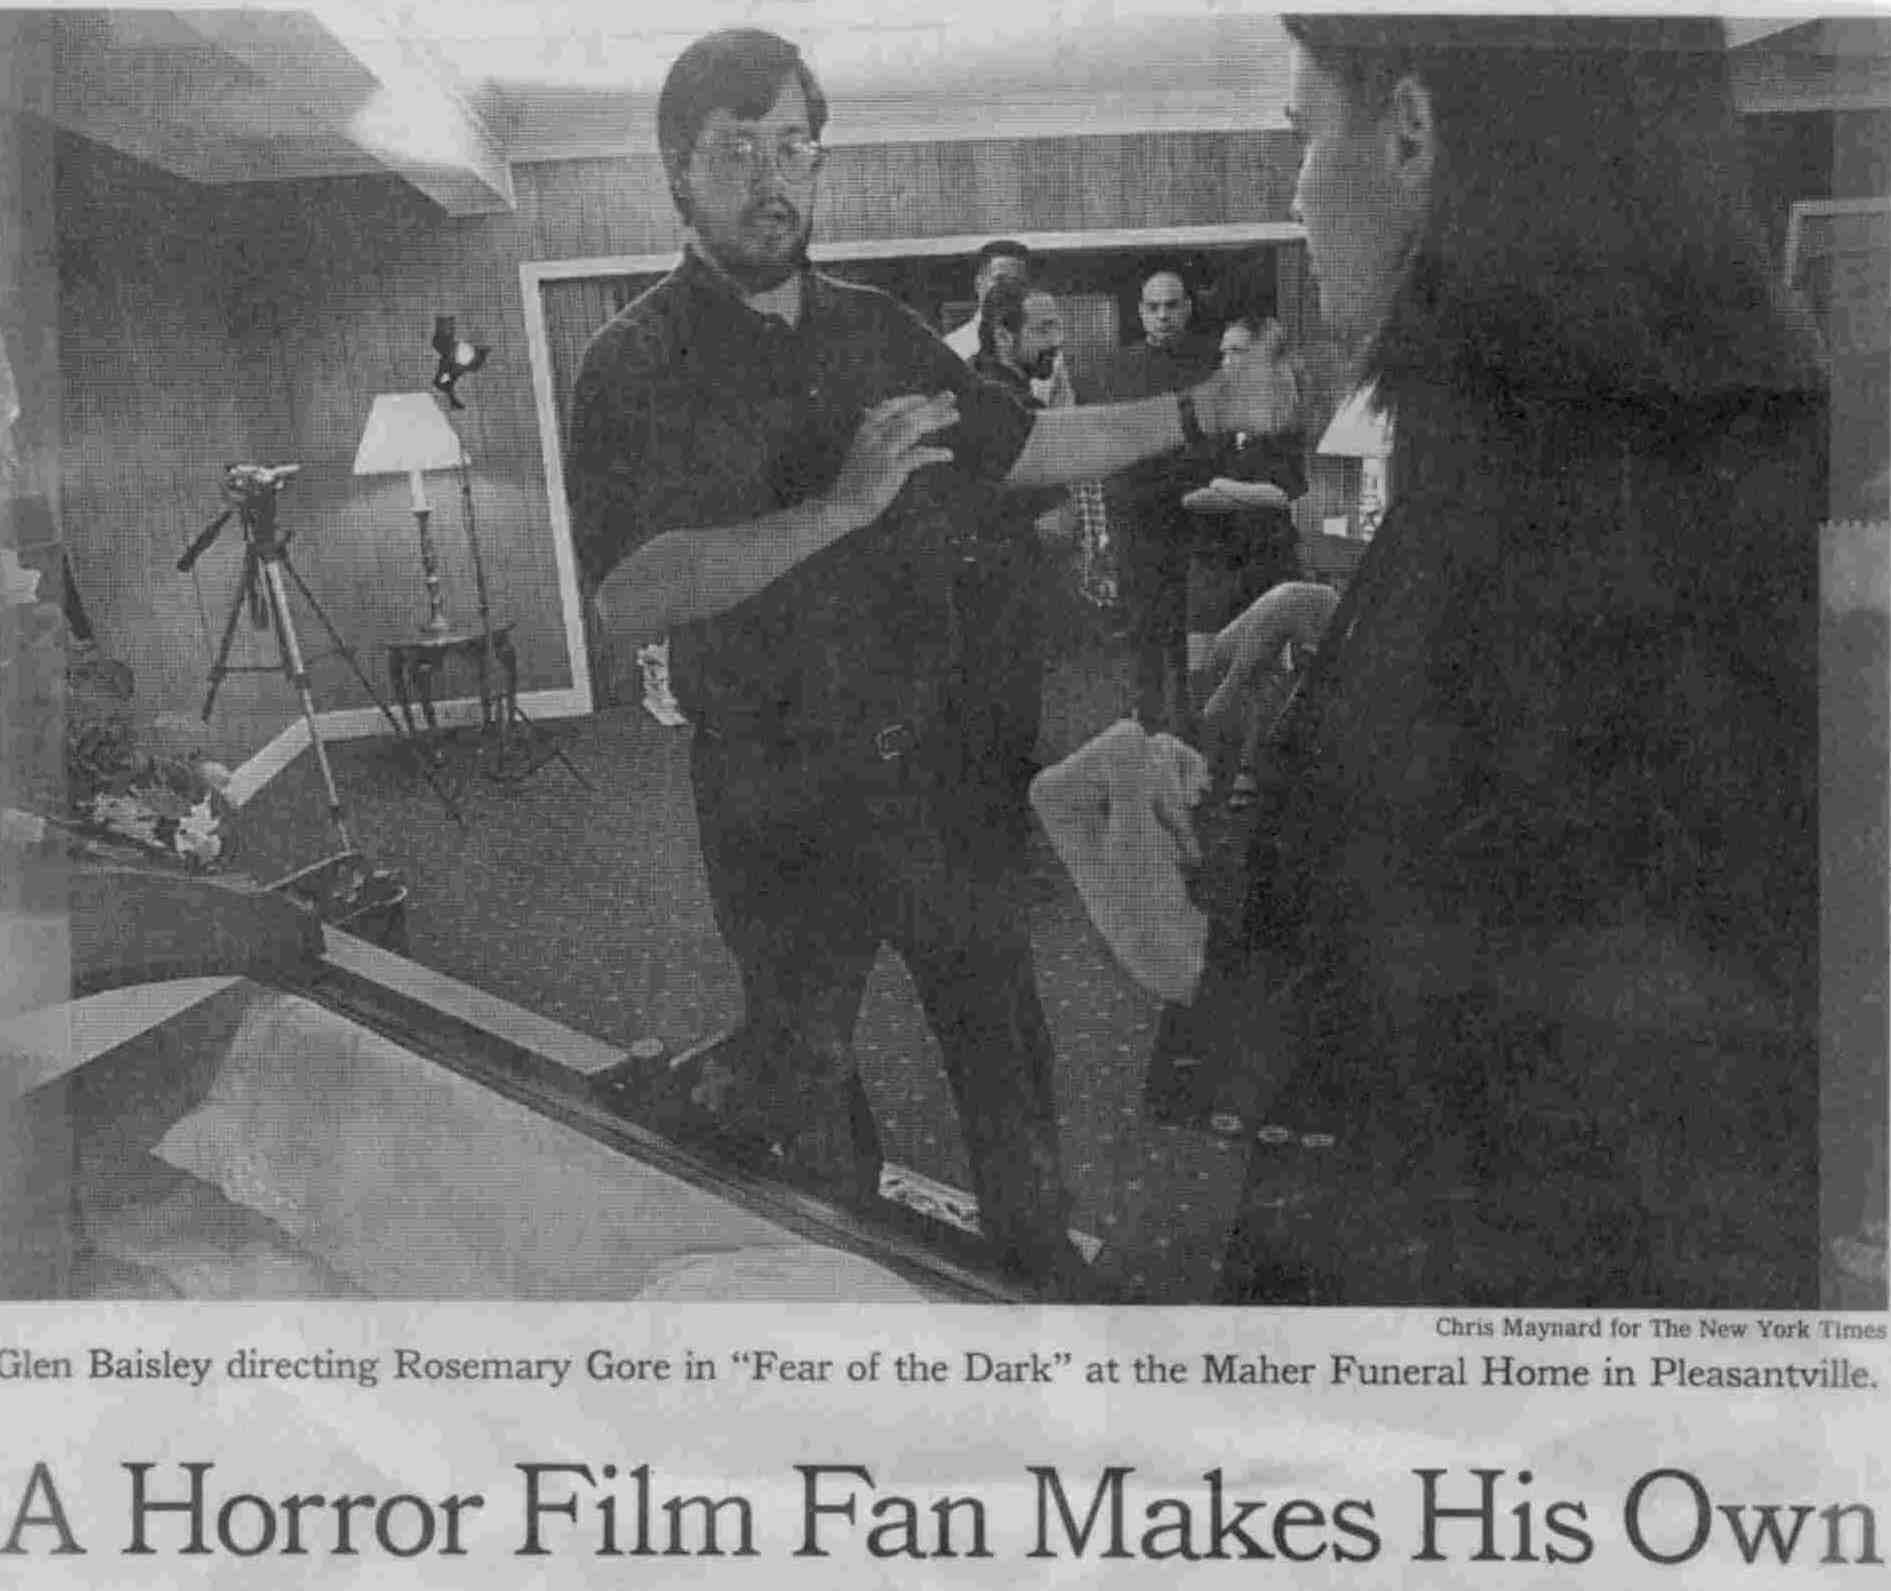 Production photo from Fear of the Dark that appeared in the New York Times.